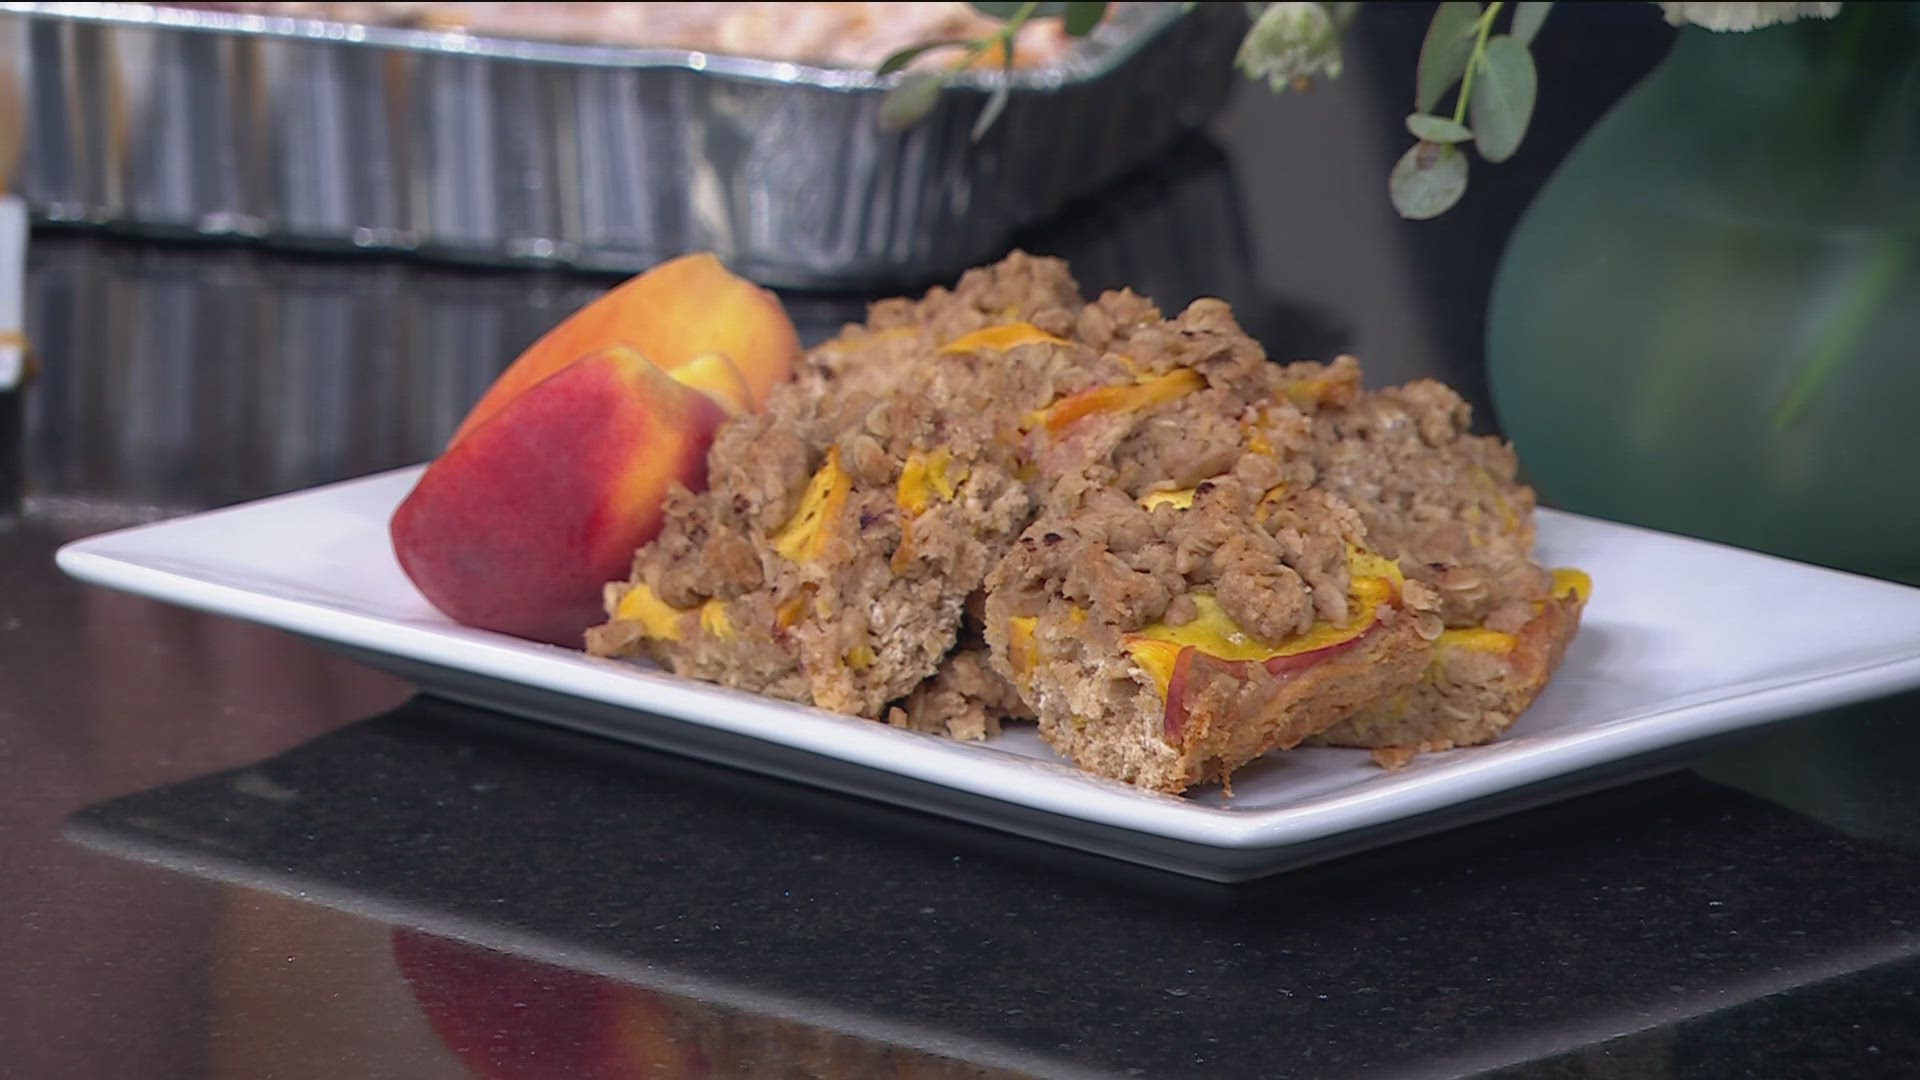 Hy-Vee Registered Dietitian Melissa Jaeger shares some advice, and a delicious recipe for Peach Oatmeal Bars.